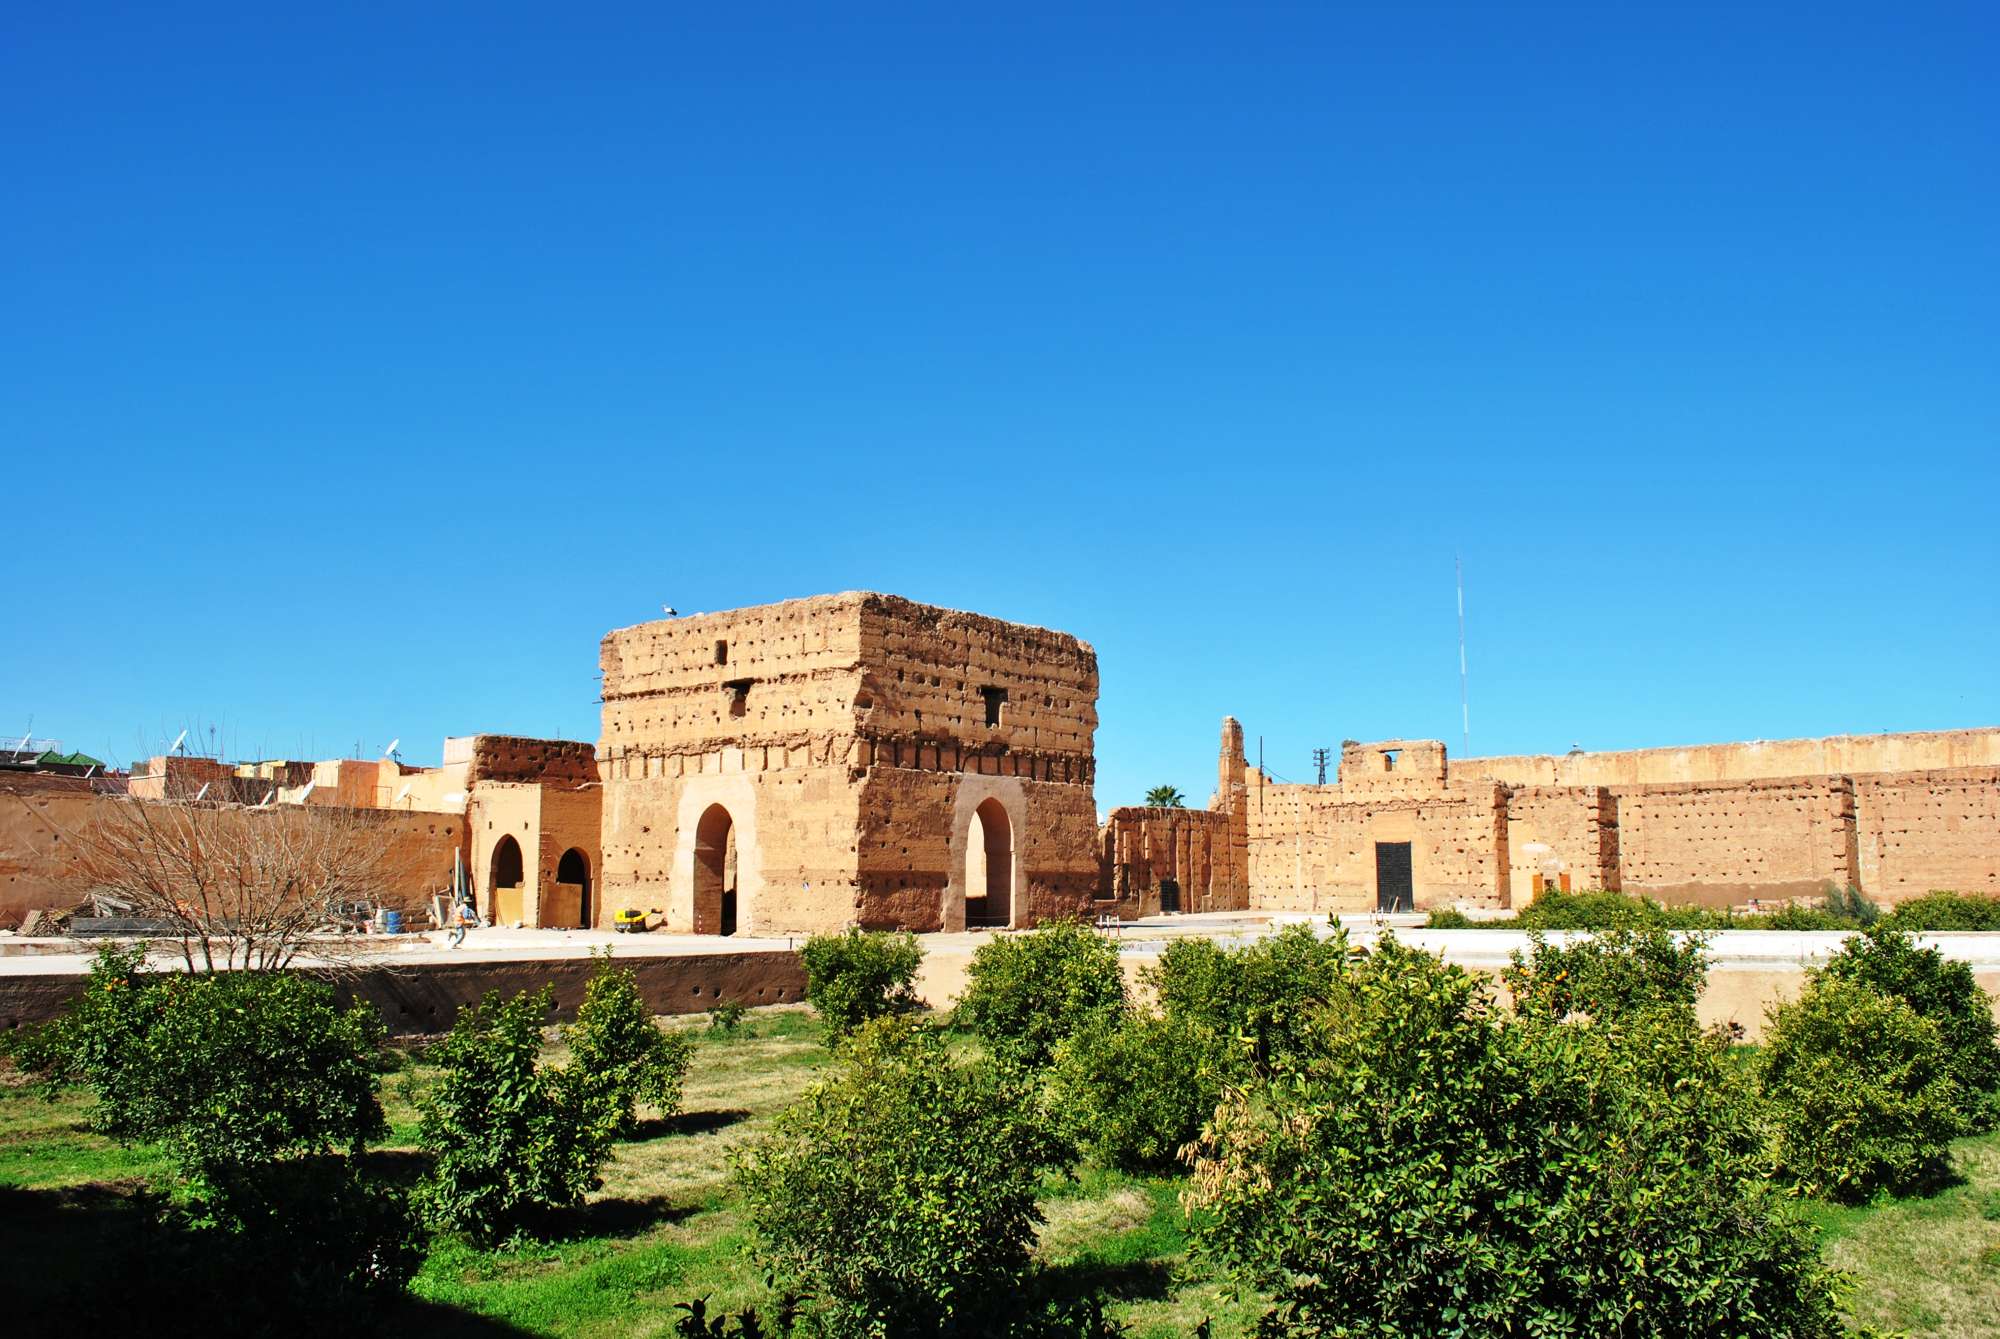 08 days Morocco imperial cities tour from Casablanca to visit Rabat, Meknes, Fez & Marrakech